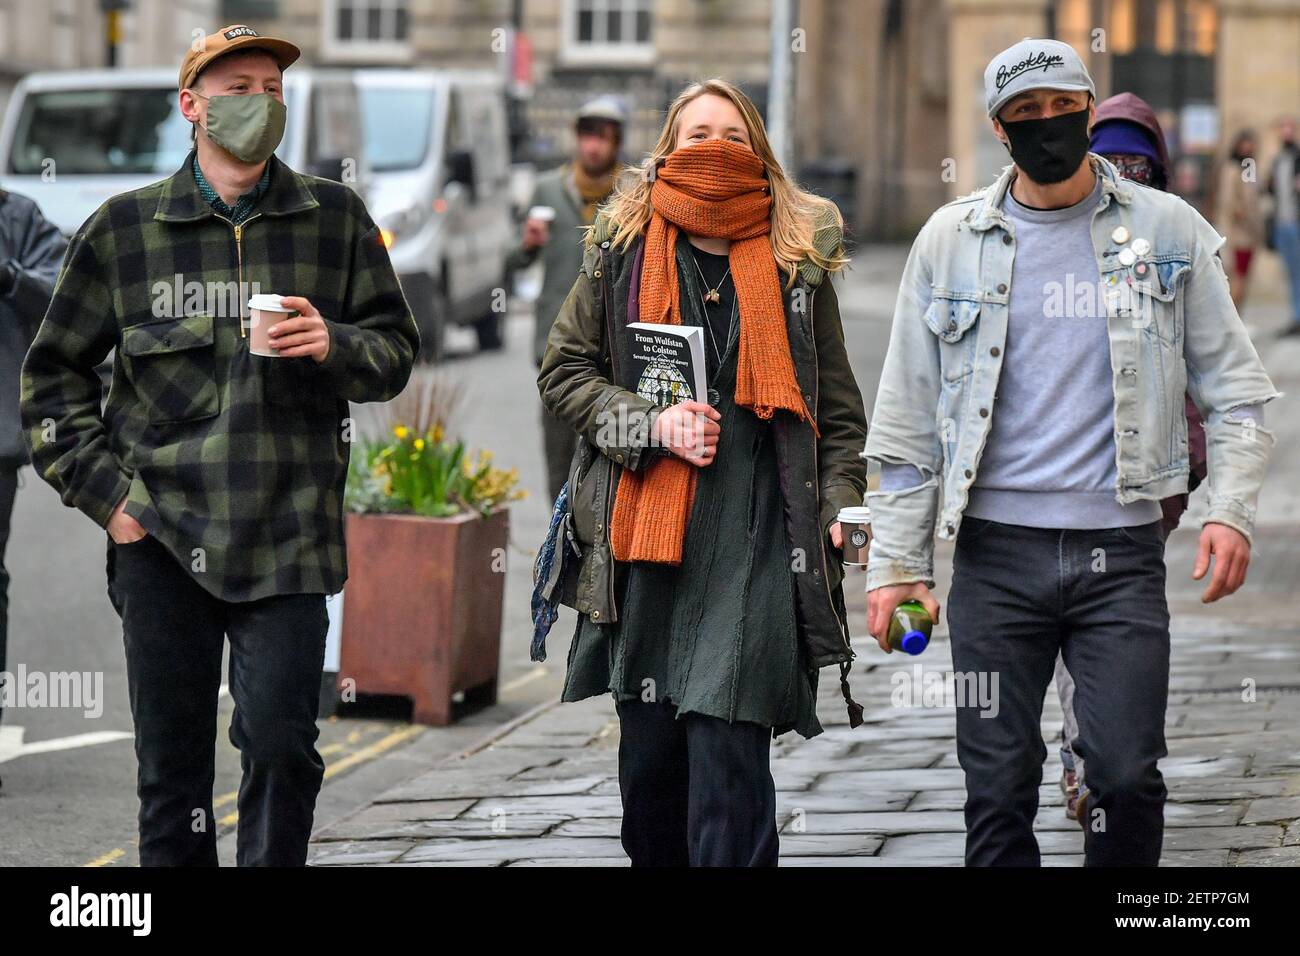 (left to right) Milo Ponsford, Rhian Graham and Jake Skuse arrive at Bristol Crown Court where they and one other are appearing charged with criminal damage over the toppling of the Edward Colston statue in Bristol during the Black Lives Matter protests in June last year. Picture date: Tuesday March 2, 2021. Stock Photo